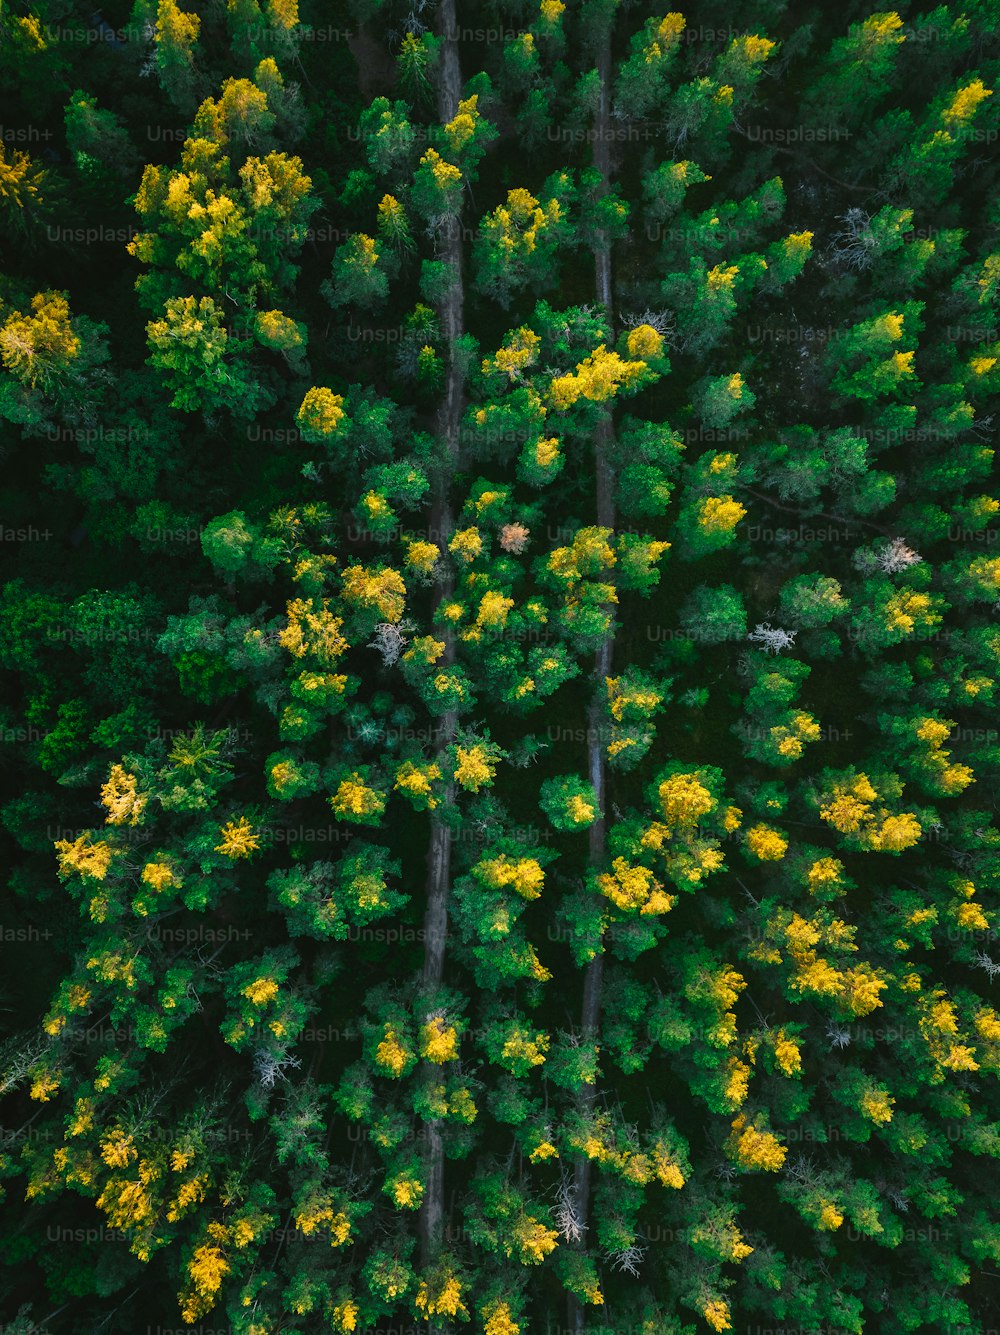 an aerial view of a forest with yellow flowers